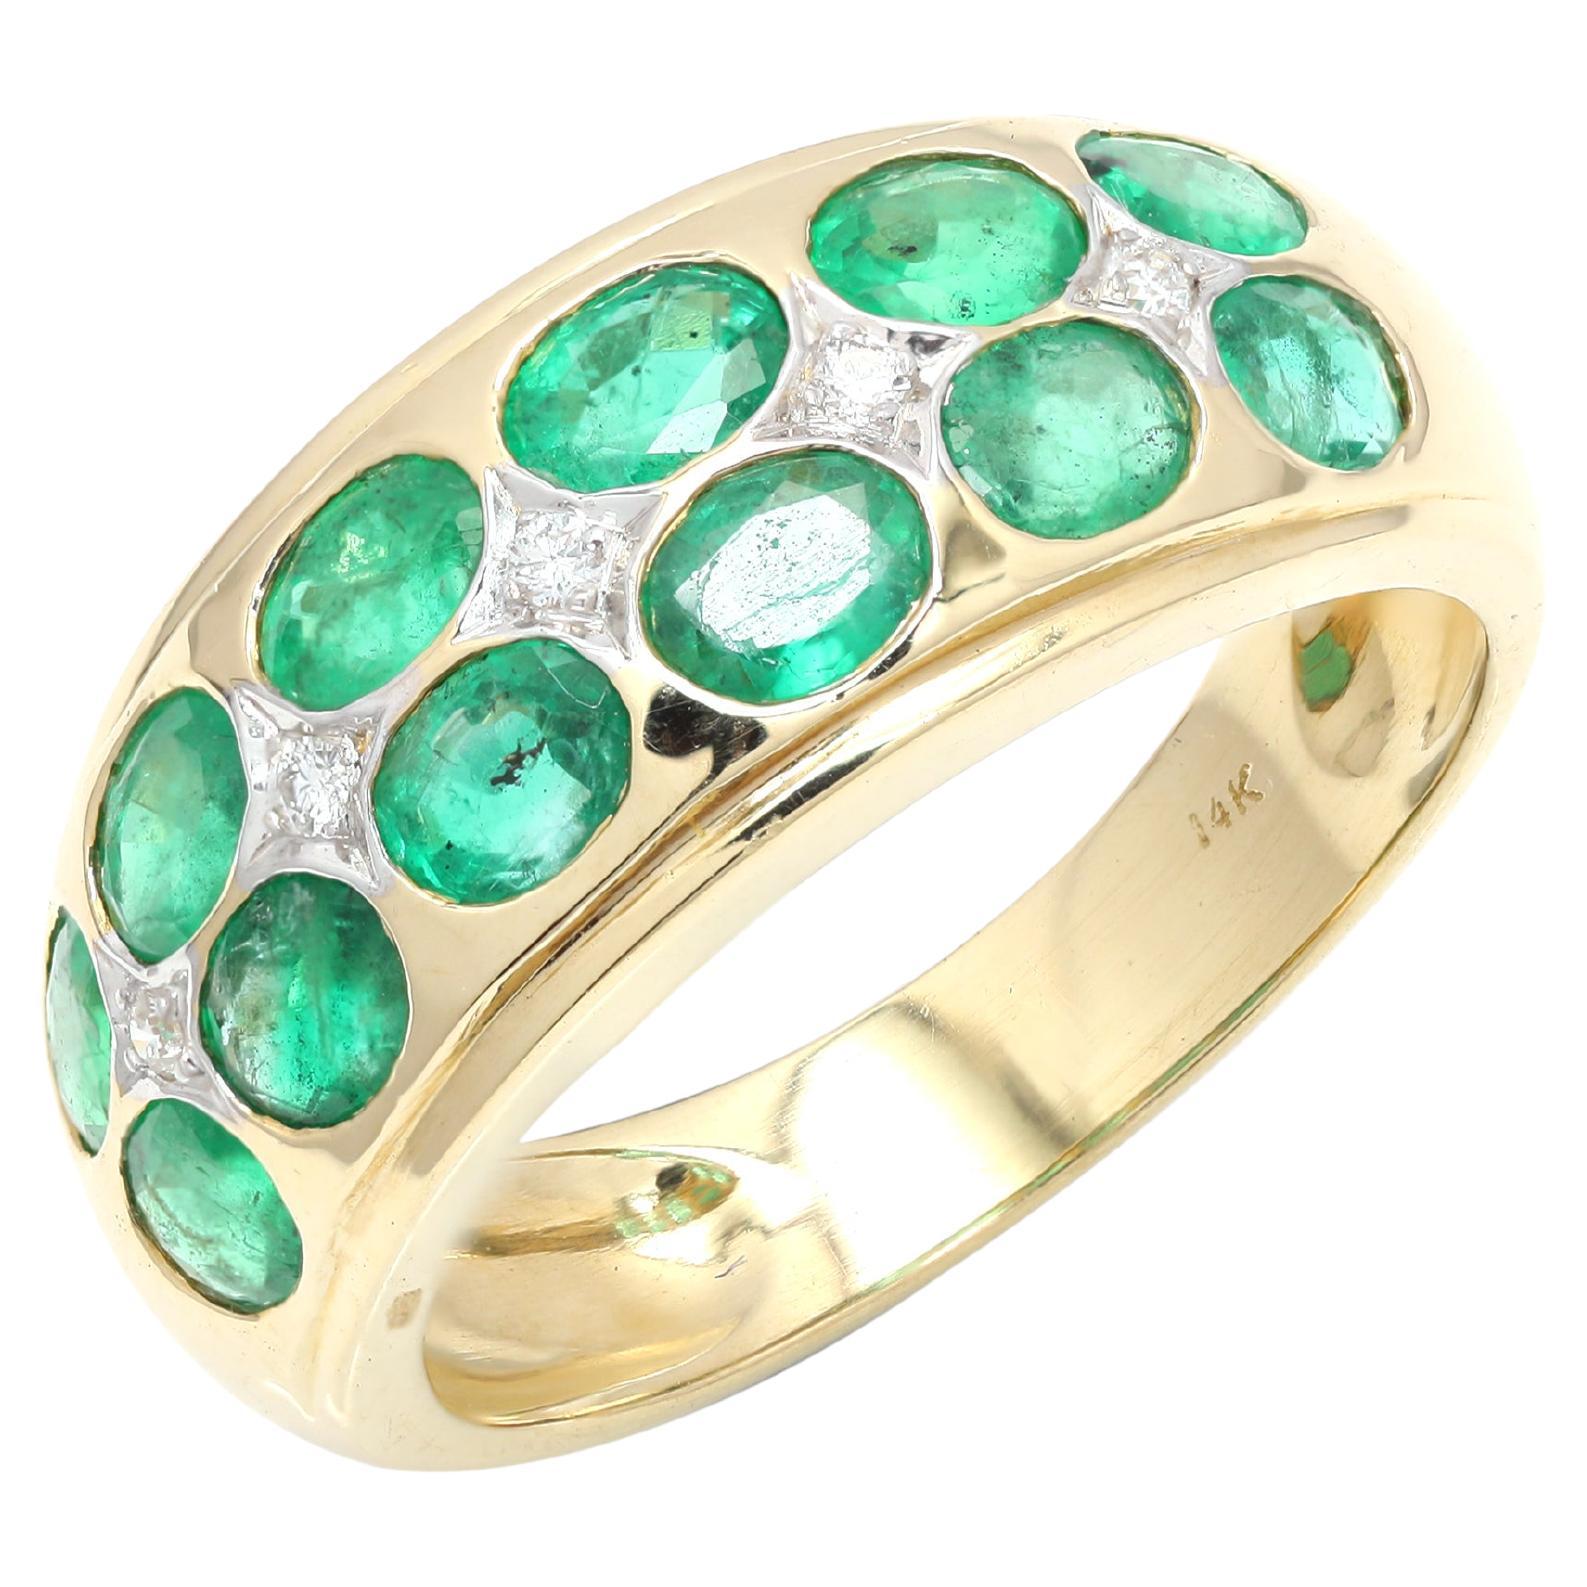 For Sale:  Natural 2.3 ct Emerald Band Ring with Diamonds Inlaid in 14K Yellow Gold